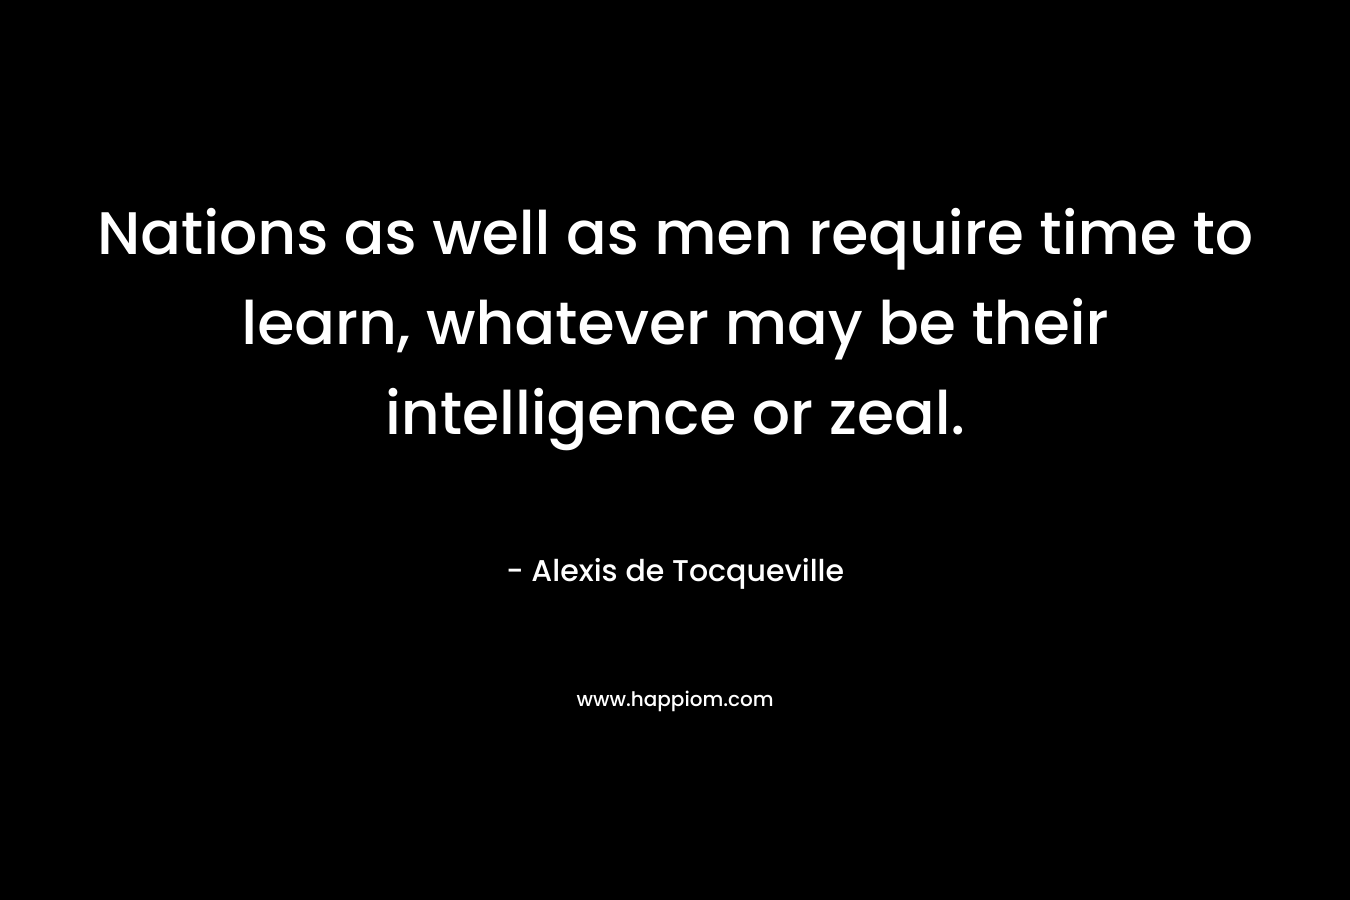 Nations as well as men require time to learn, whatever may be their intelligence or zeal.